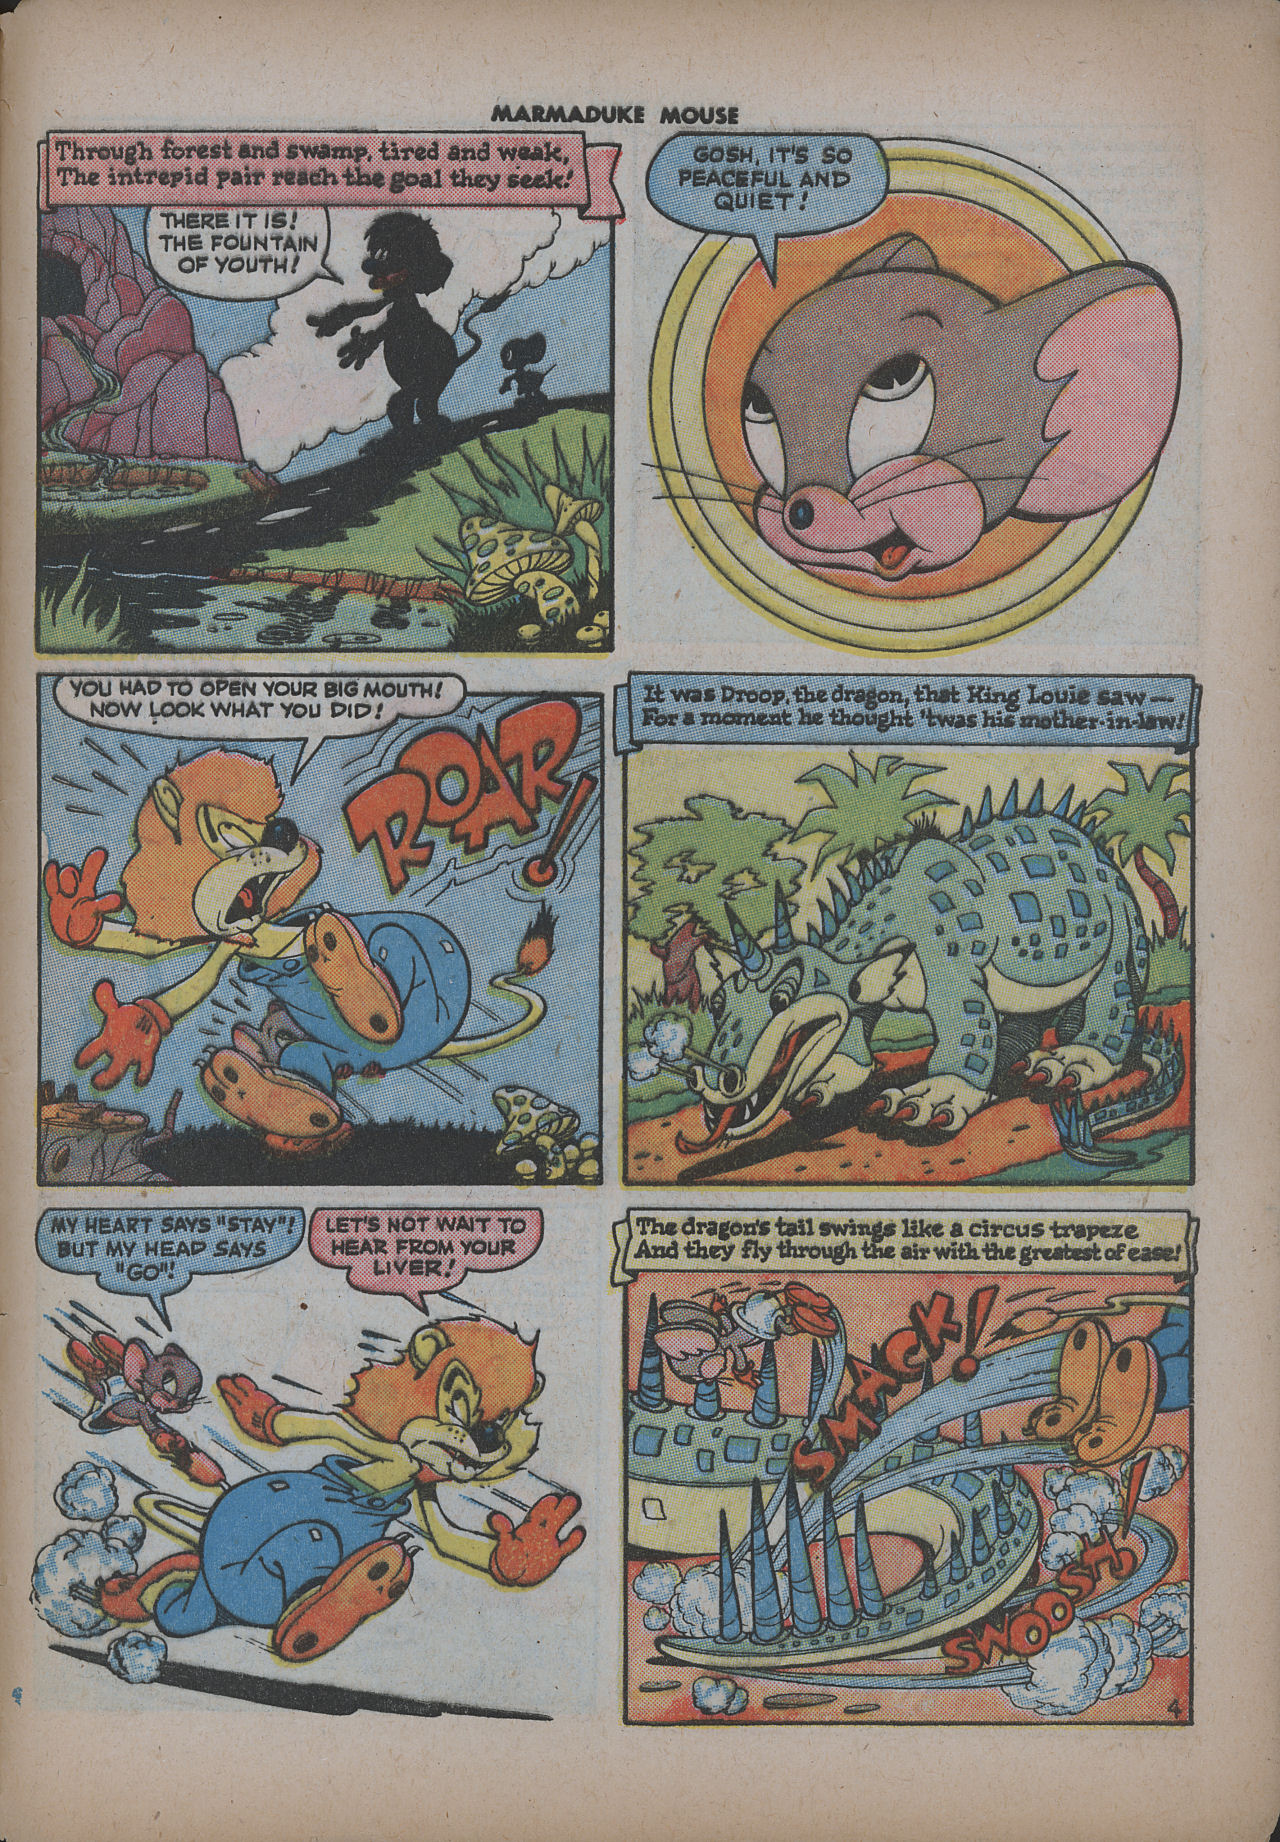 Read online Marmaduke Mouse comic -  Issue #1 - 48